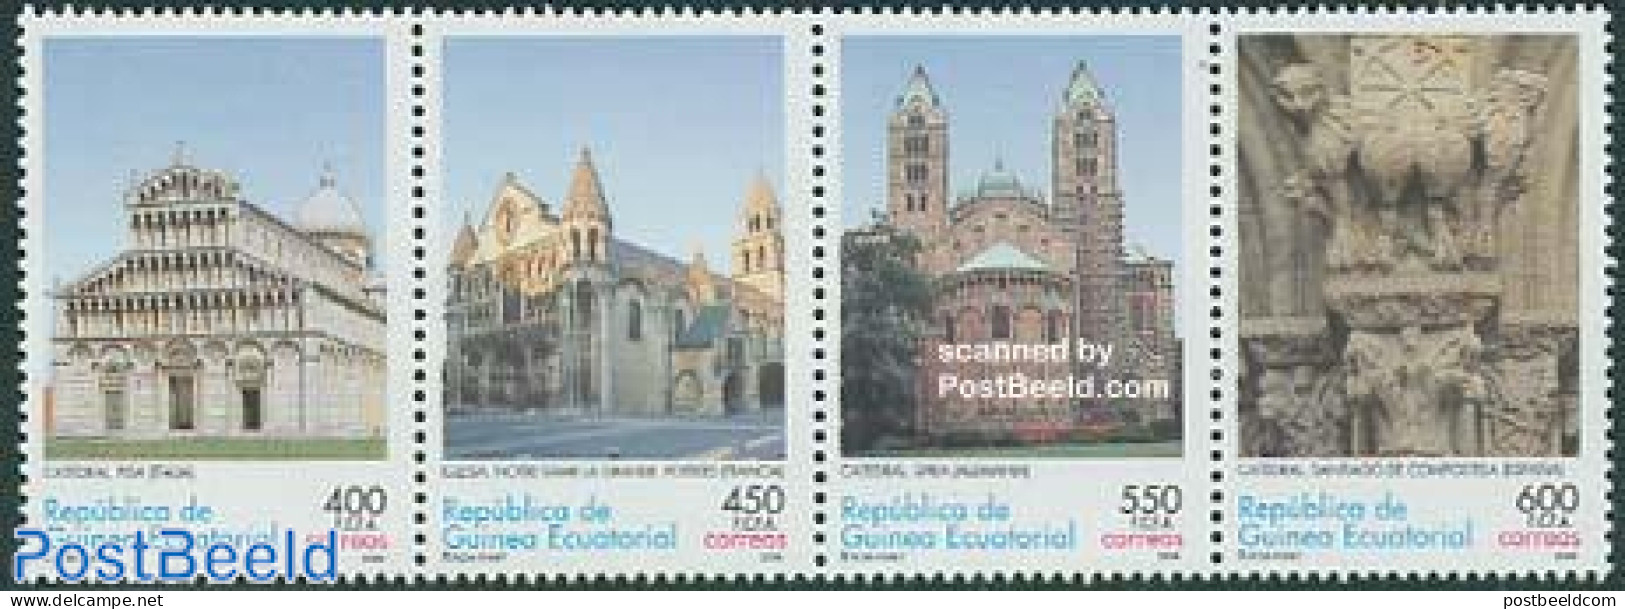 Equatorial Guinea 2005 Roman Architecture 4v [:::], Mint NH, Religion - Churches, Temples, Mosques, Synagogues - Churches & Cathedrals